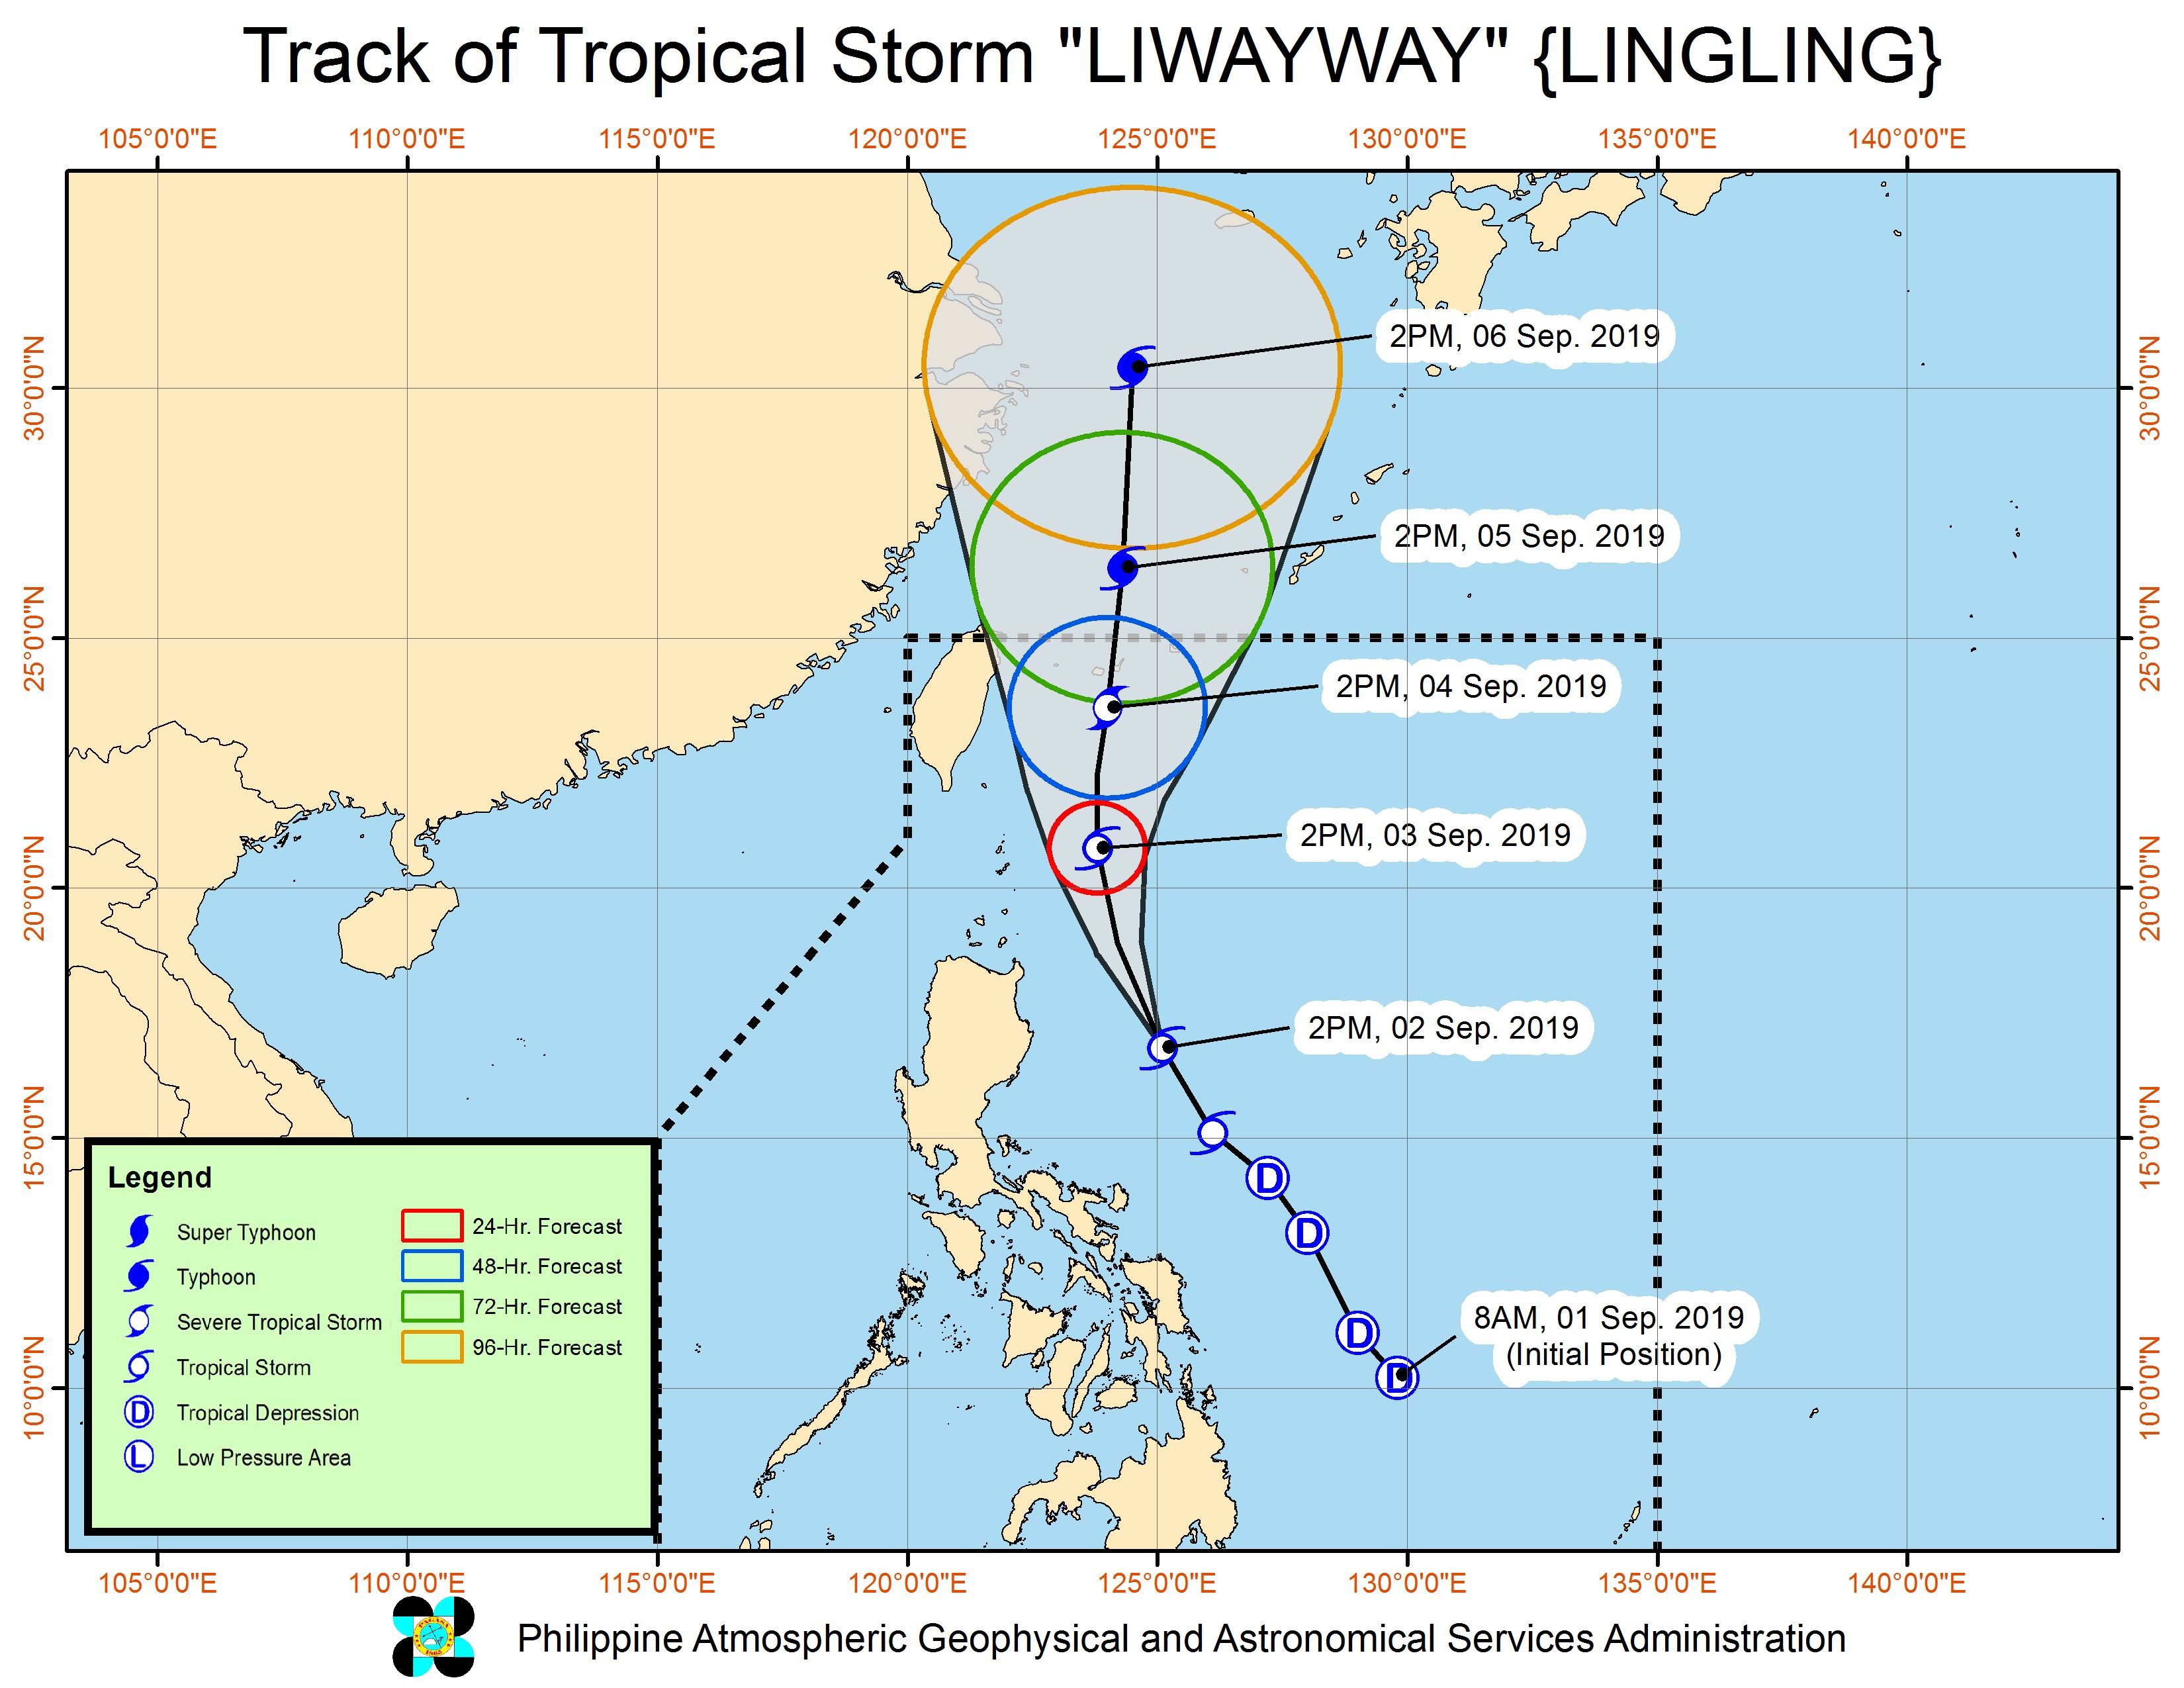 Forecast track of Tropical Storm Liwayway (Lingling) as of September 2, 2019, 5 pm. Image from PAGASA 